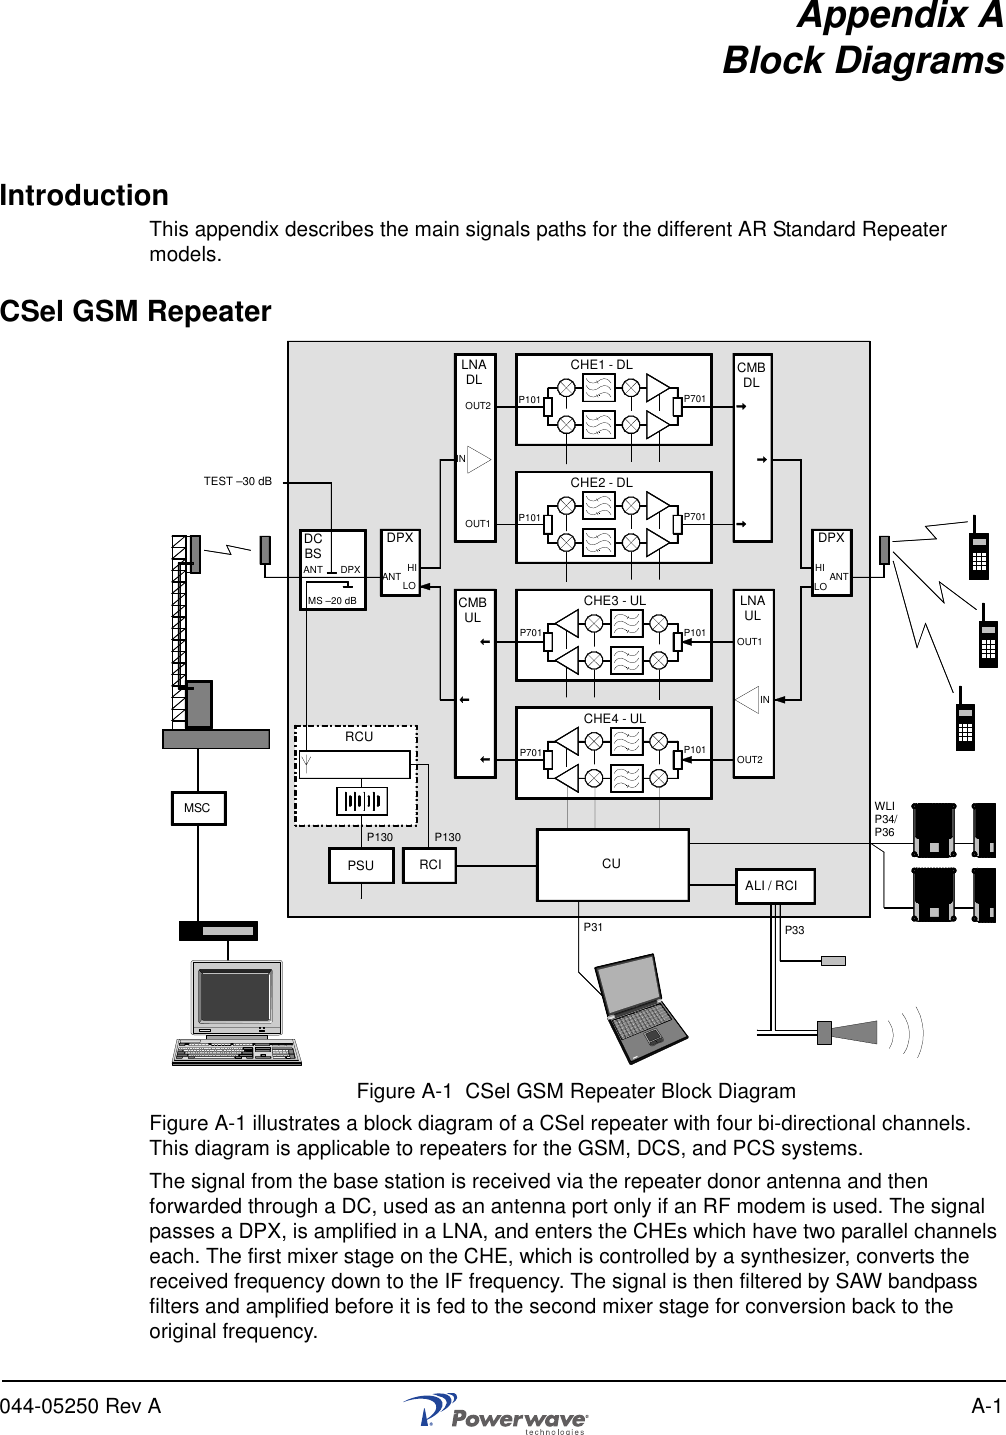 044-05250 Rev A A-1Appendix ABlock DiagramsIntroductionThis appendix describes the main signals paths for the different AR Standard Repeater models.CSel GSM RepeaterFigure A-1  CSel GSM Repeater Block DiagramFigure A-1 illustrates a block diagram of a CSel repeater with four bi-directional channels. This diagram is applicable to repeaters for the GSM, DCS, and PCS systems.The signal from the base station is received via the repeater donor antenna and then forwarded through a DC, used as an antenna port only if an RF modem is used. The signal passes a DPX, is amplified in a LNA, and enters the CHEs which have two parallel channels each. The first mixer stage on the CHE, which is controlled by a synthesizer, converts the received frequency down to the IF frequency. The signal is then filtered by SAW bandpass filters and amplified before it is fed to the second mixer stage for conversion back to the original frequency.DCBSP31 P33TEST –30 dBCHE1 - DLCHE2 - DLCHE3 - ULCHE4 - ULDPXLNADL CMBDLMS –20 dBDPXALI / RCICUWLIP34/P36P130 P130ANT DPX ANT HILOHILOINOUT2OUT1P101 P701P101 P701ANTP101P101P701P701LNAULINOUT1OUT2CMBULRCUPSU RCIMSC